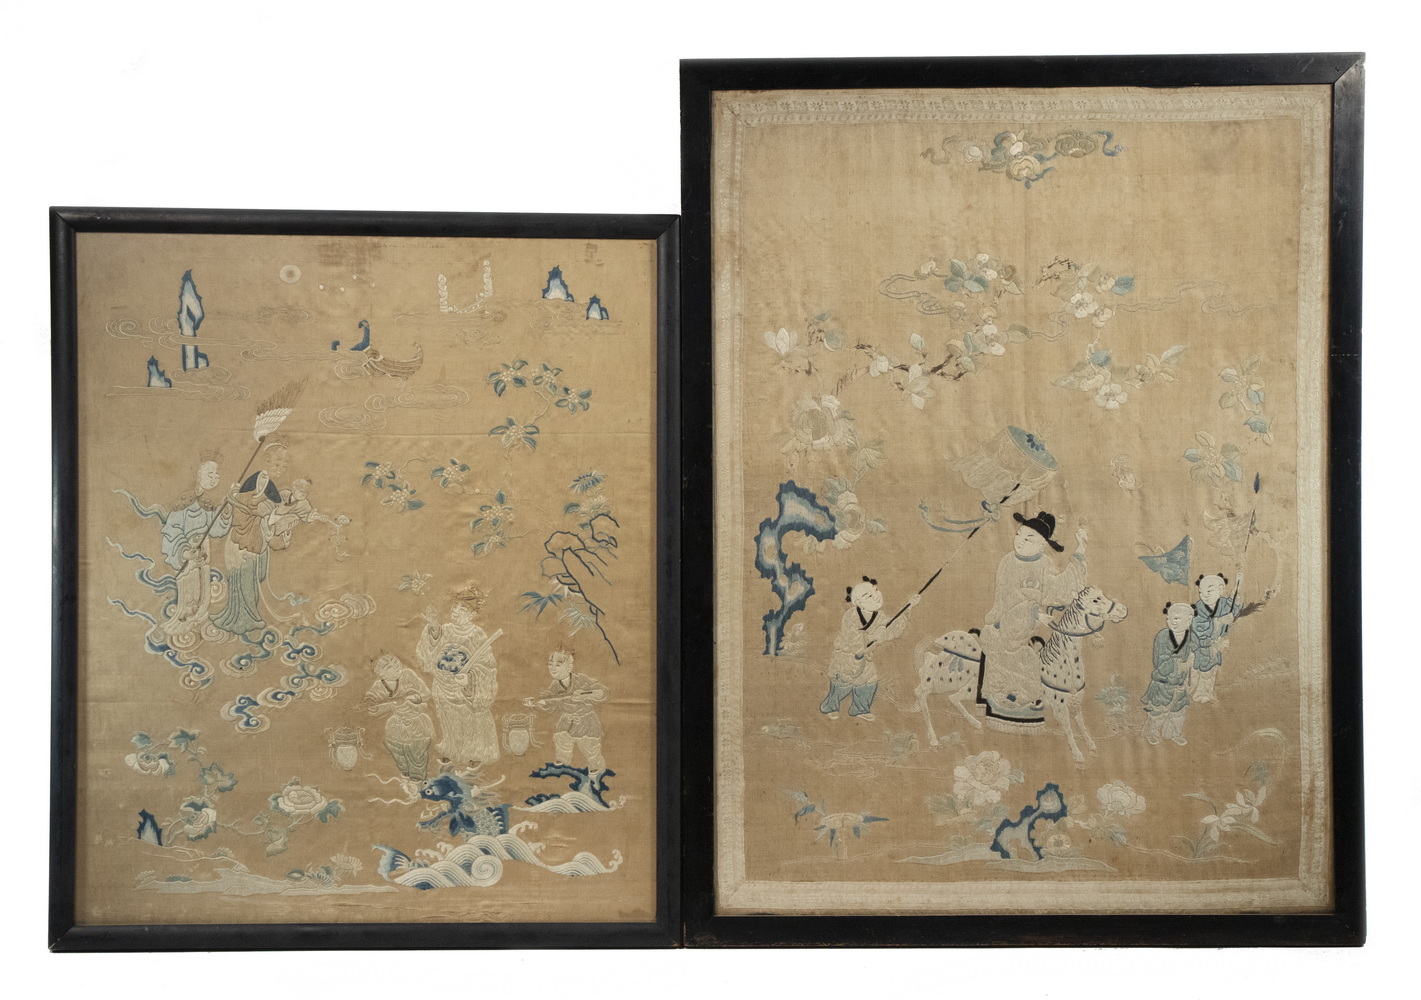  2 FRAMED FRAGMENTS OF EARLY CHINESE 2b3df3